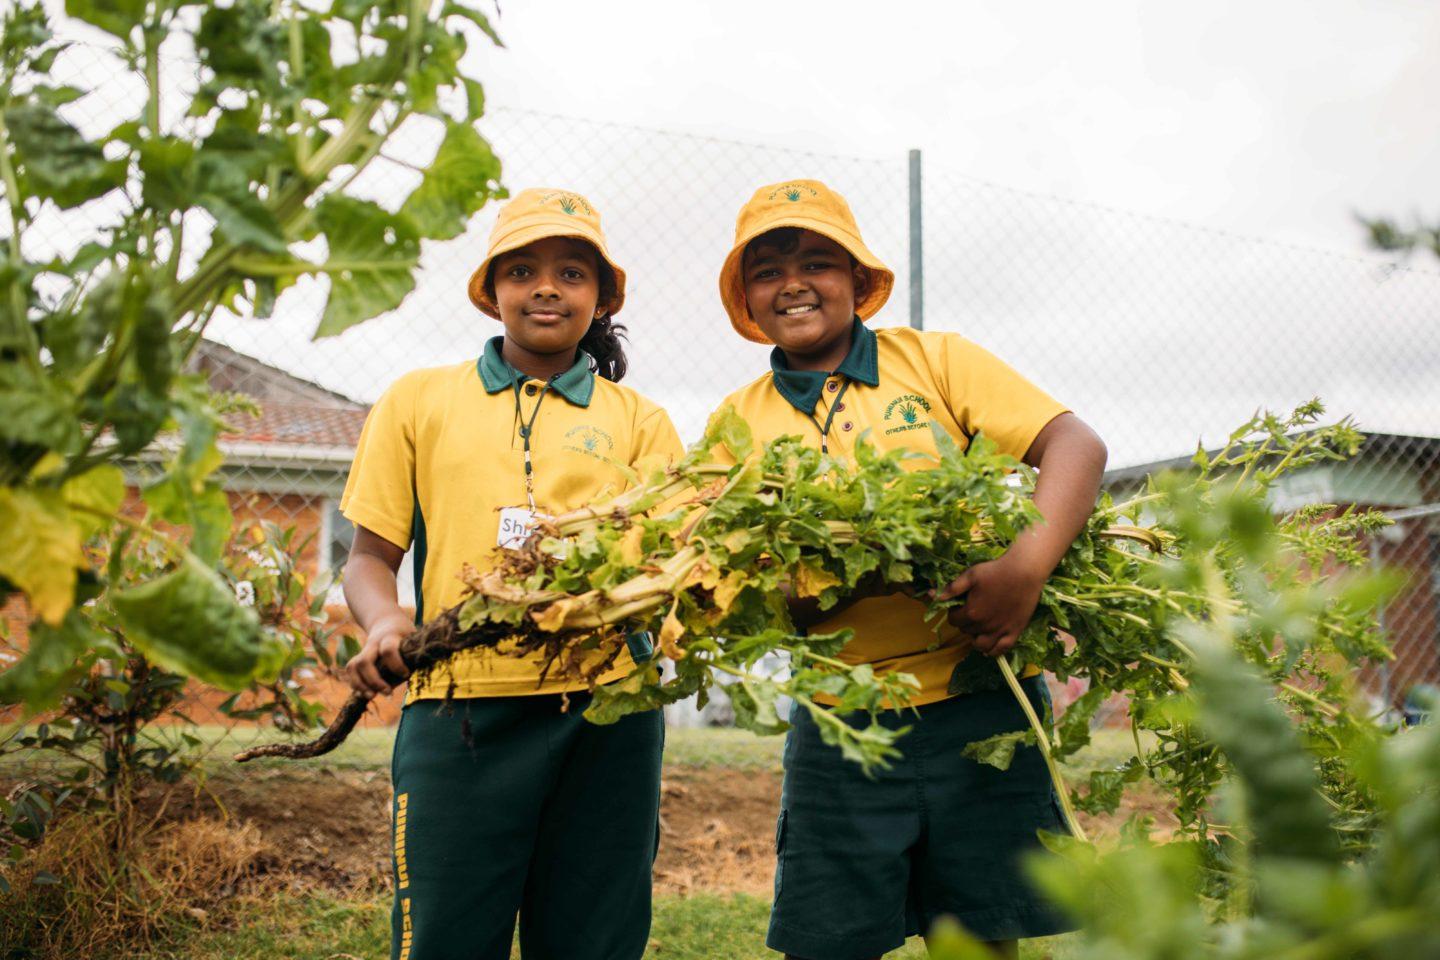 Two school students are holding a harvest from the school garden